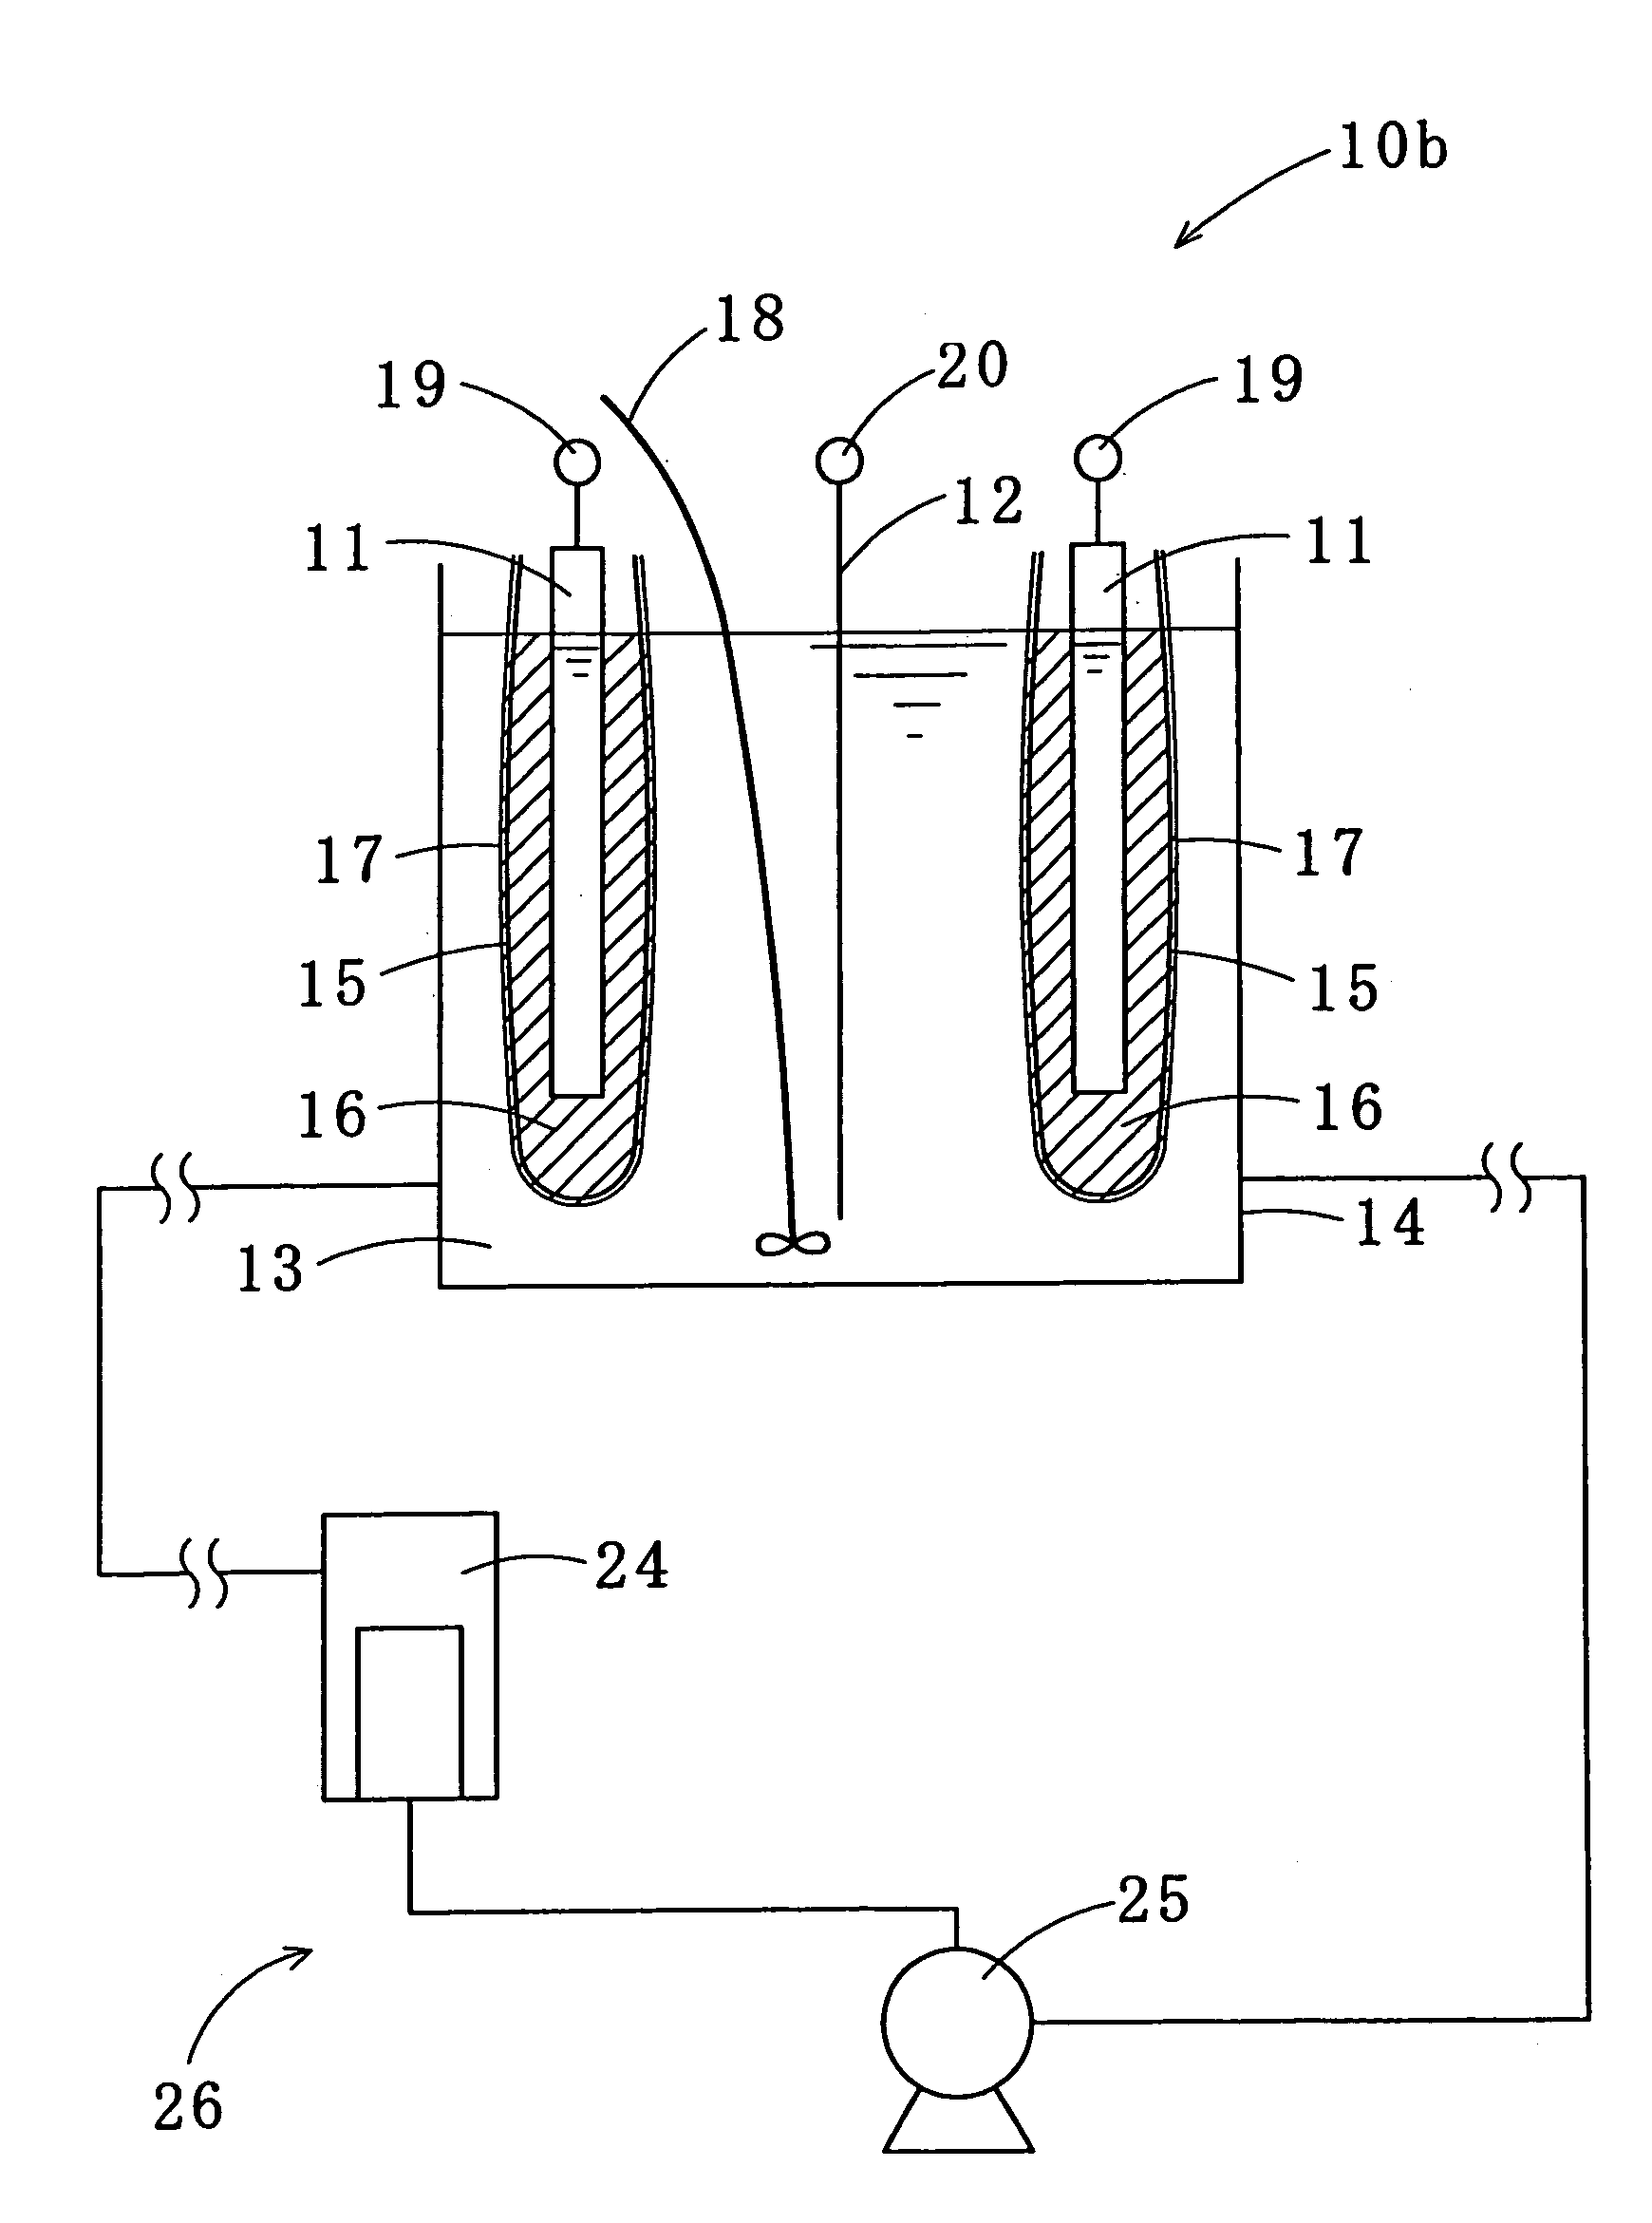 Tin-silver-copper plating solution, plating film containing the same, and method for forming the plating film